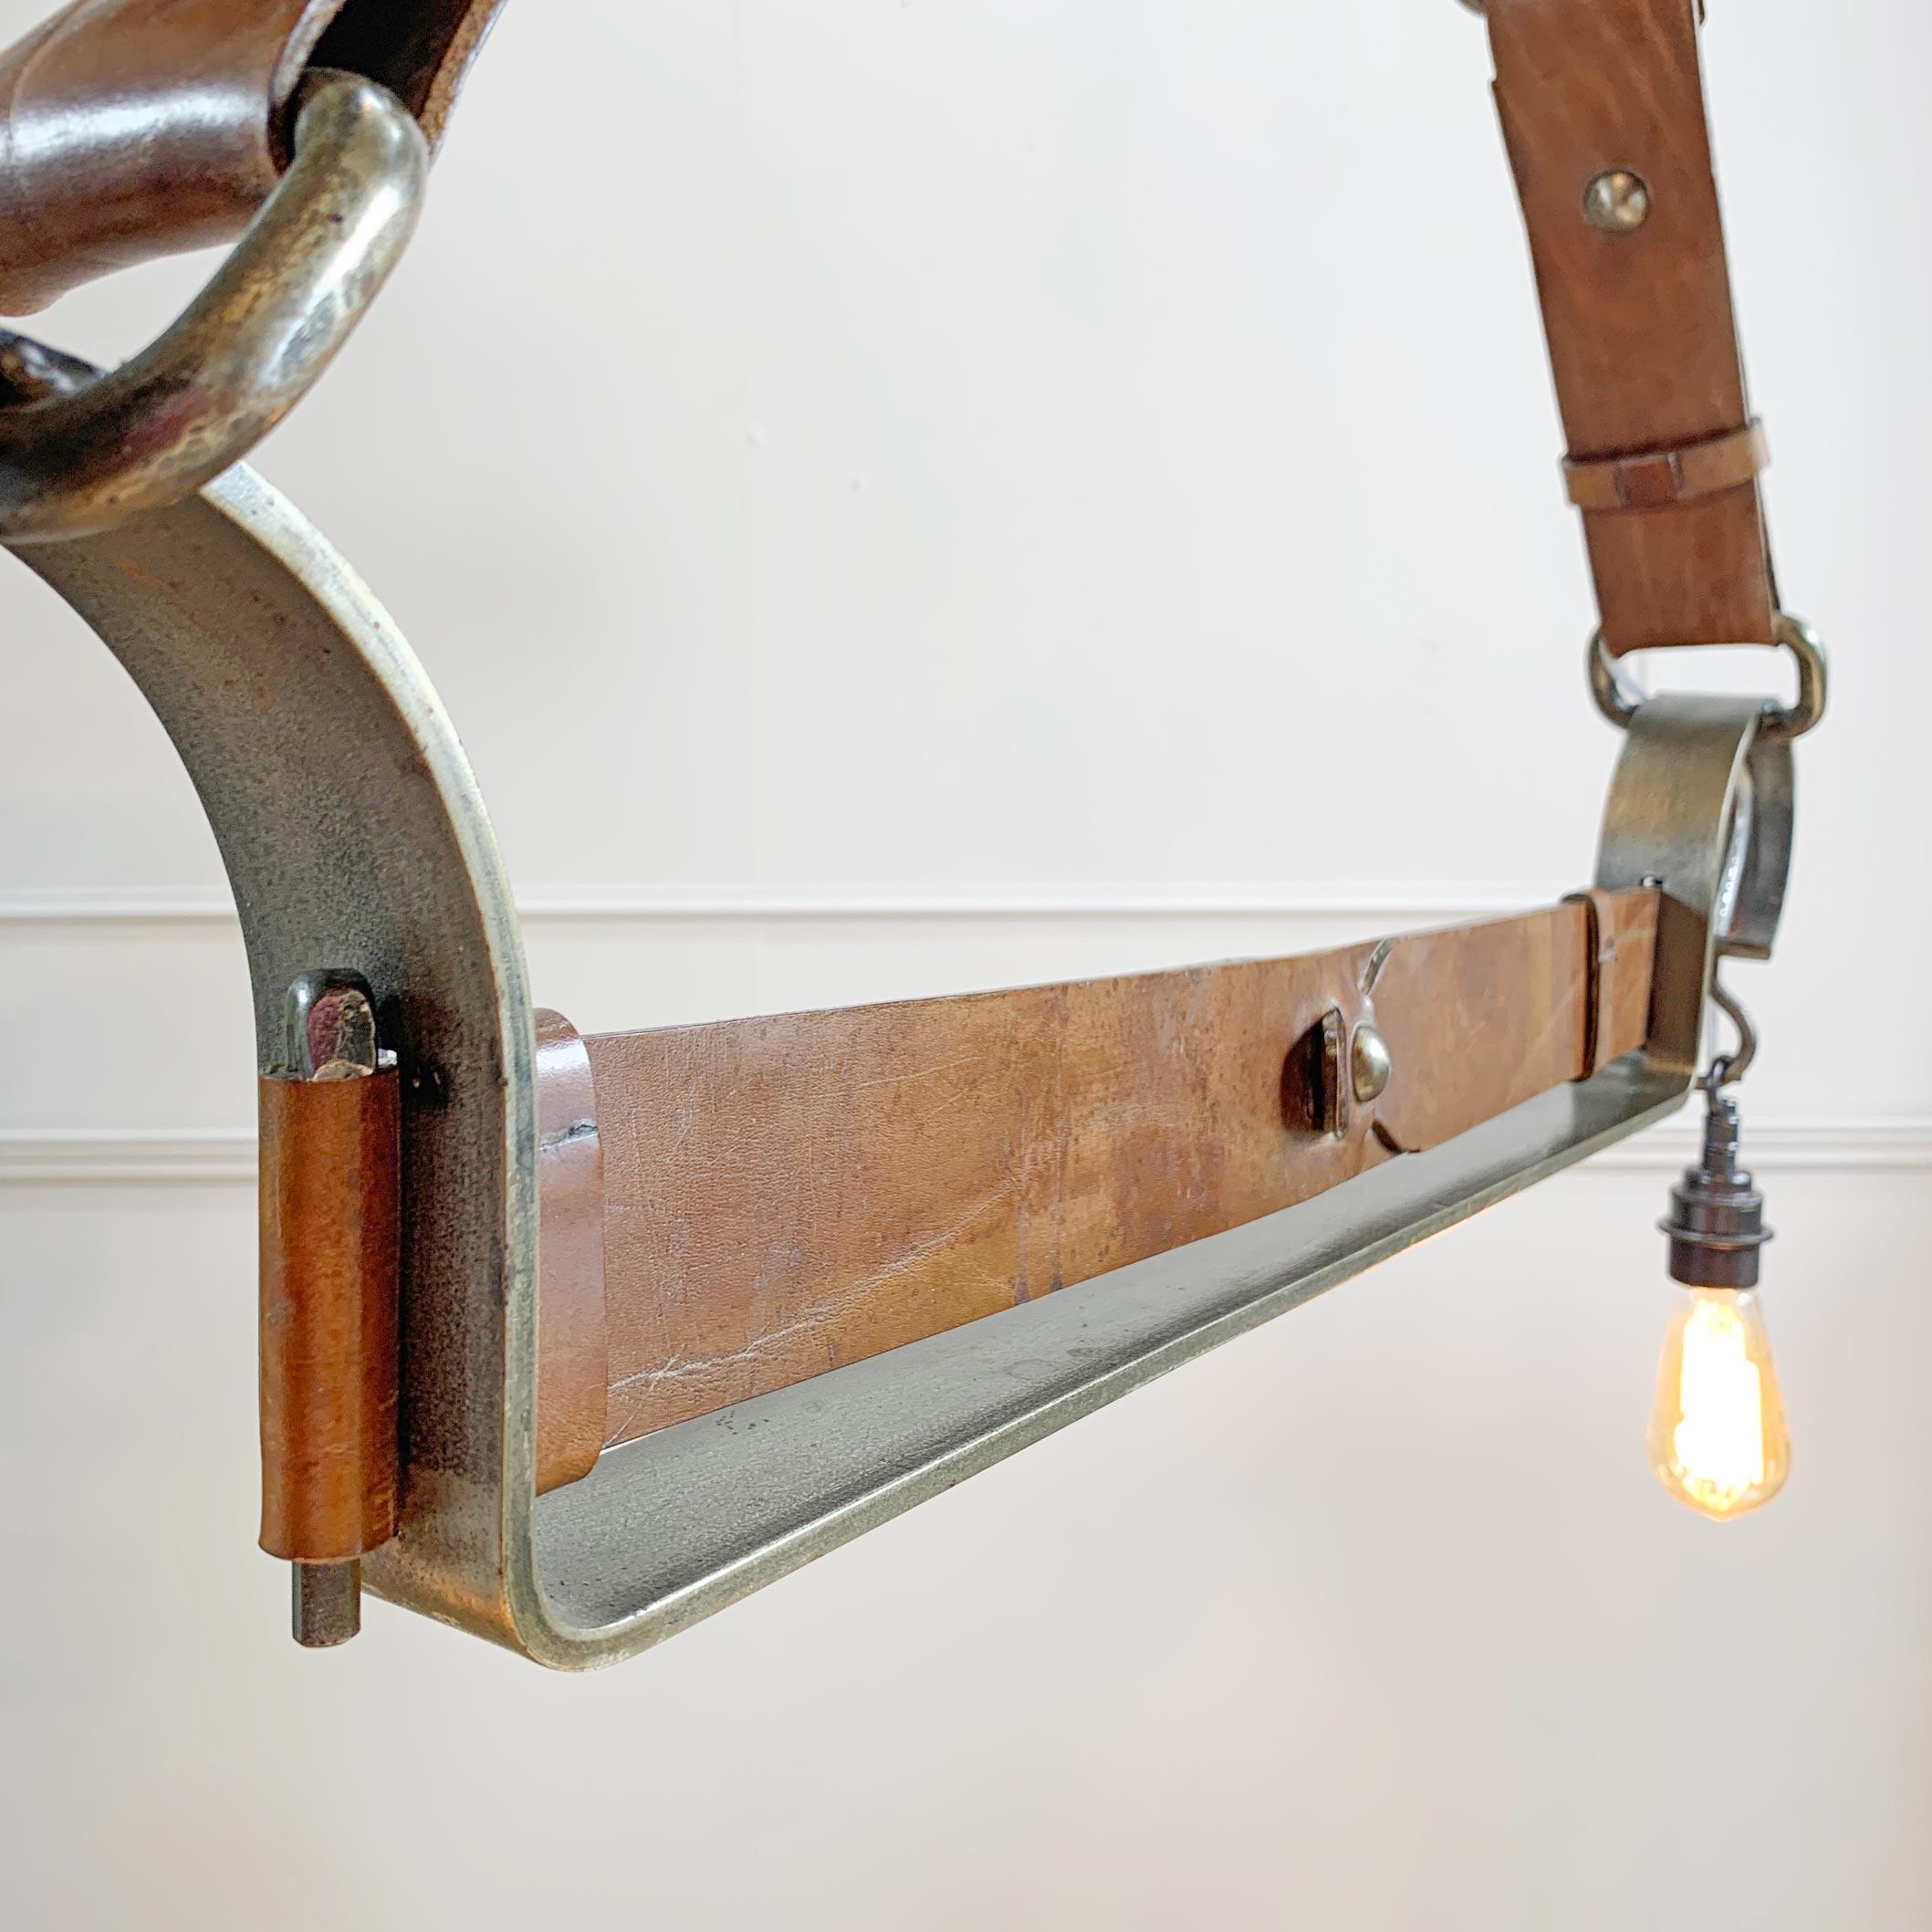 Jean-Pierre Ryckaert Tan Leather Strap and Steel Ceiling Pendant Light For Sale 6